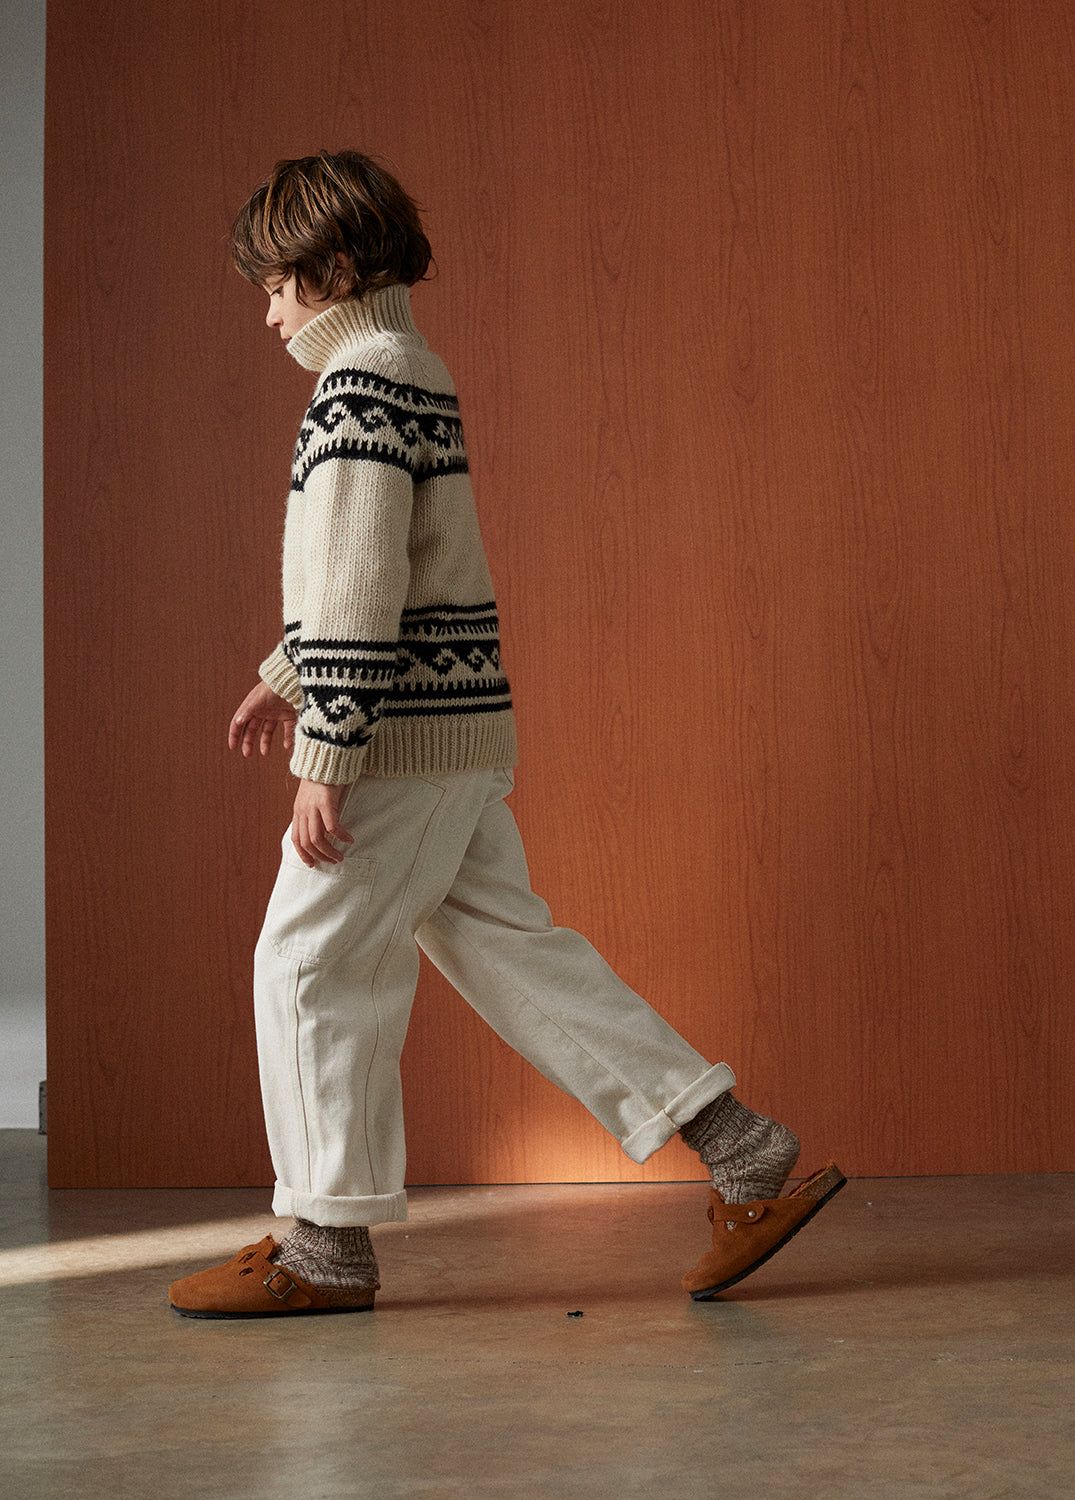 The New Society Andy Jumper High Neck Sand - La Gentile Store